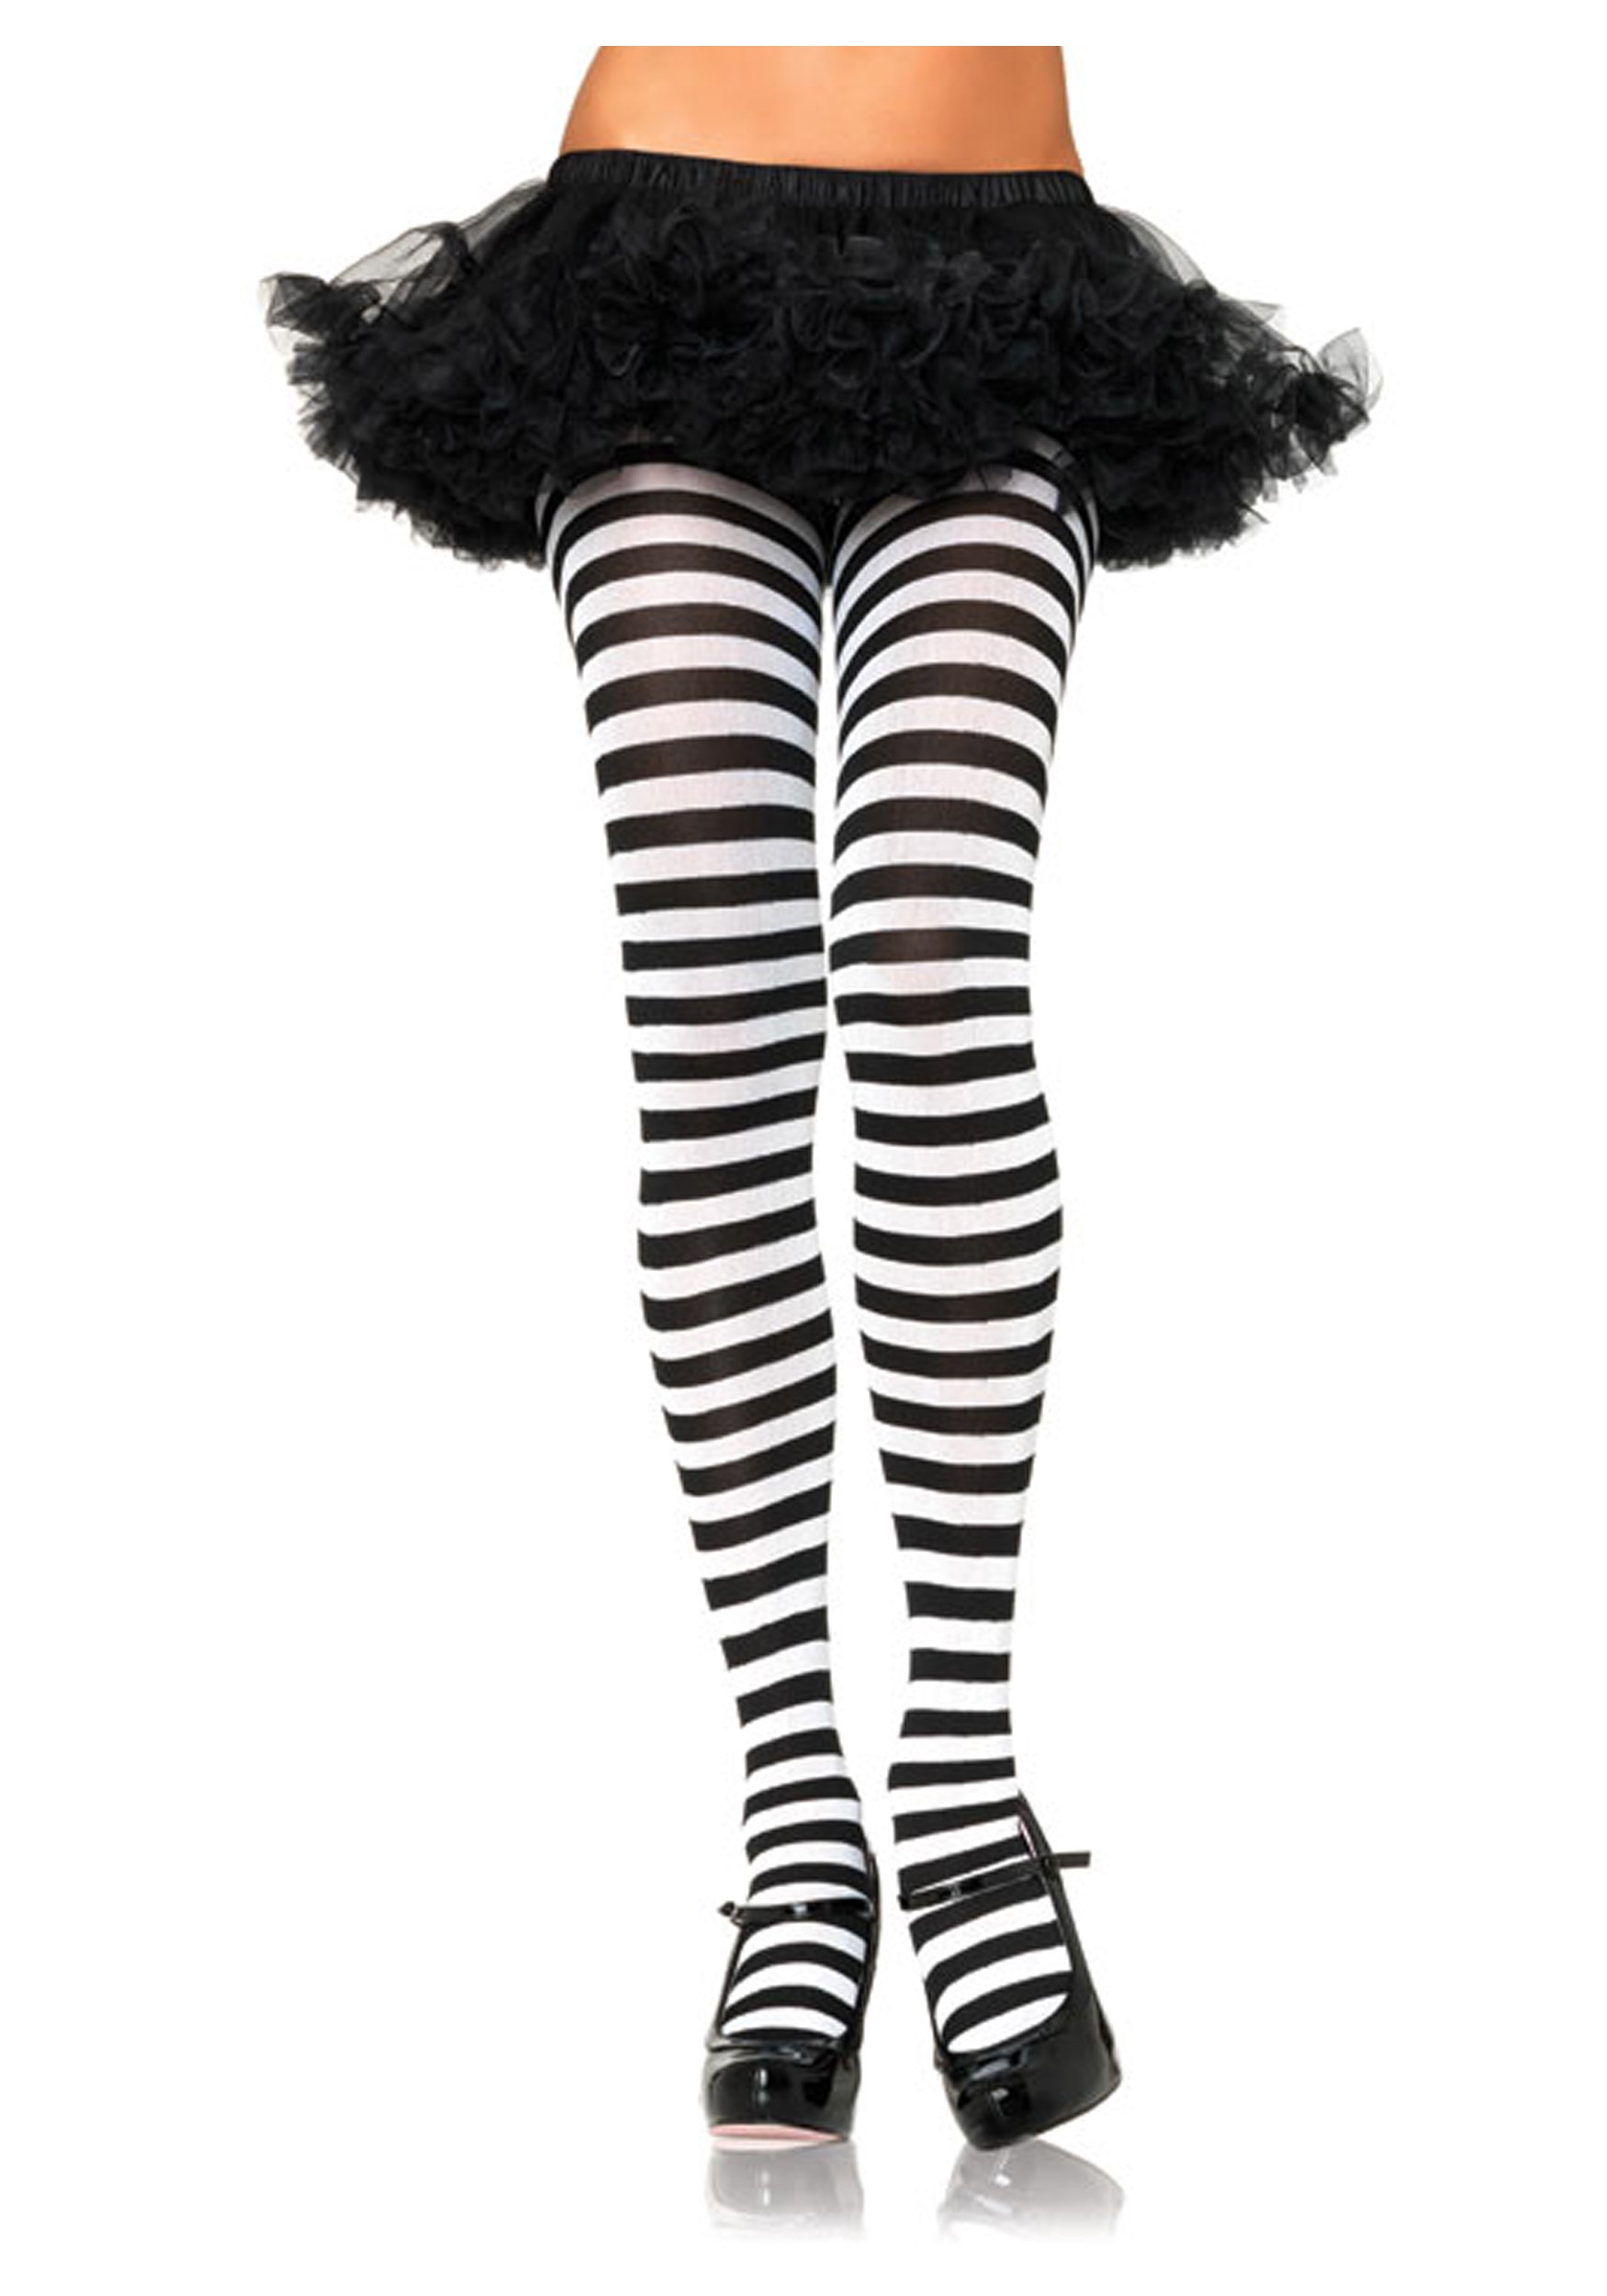 Black and White Striped Plus Size Tights